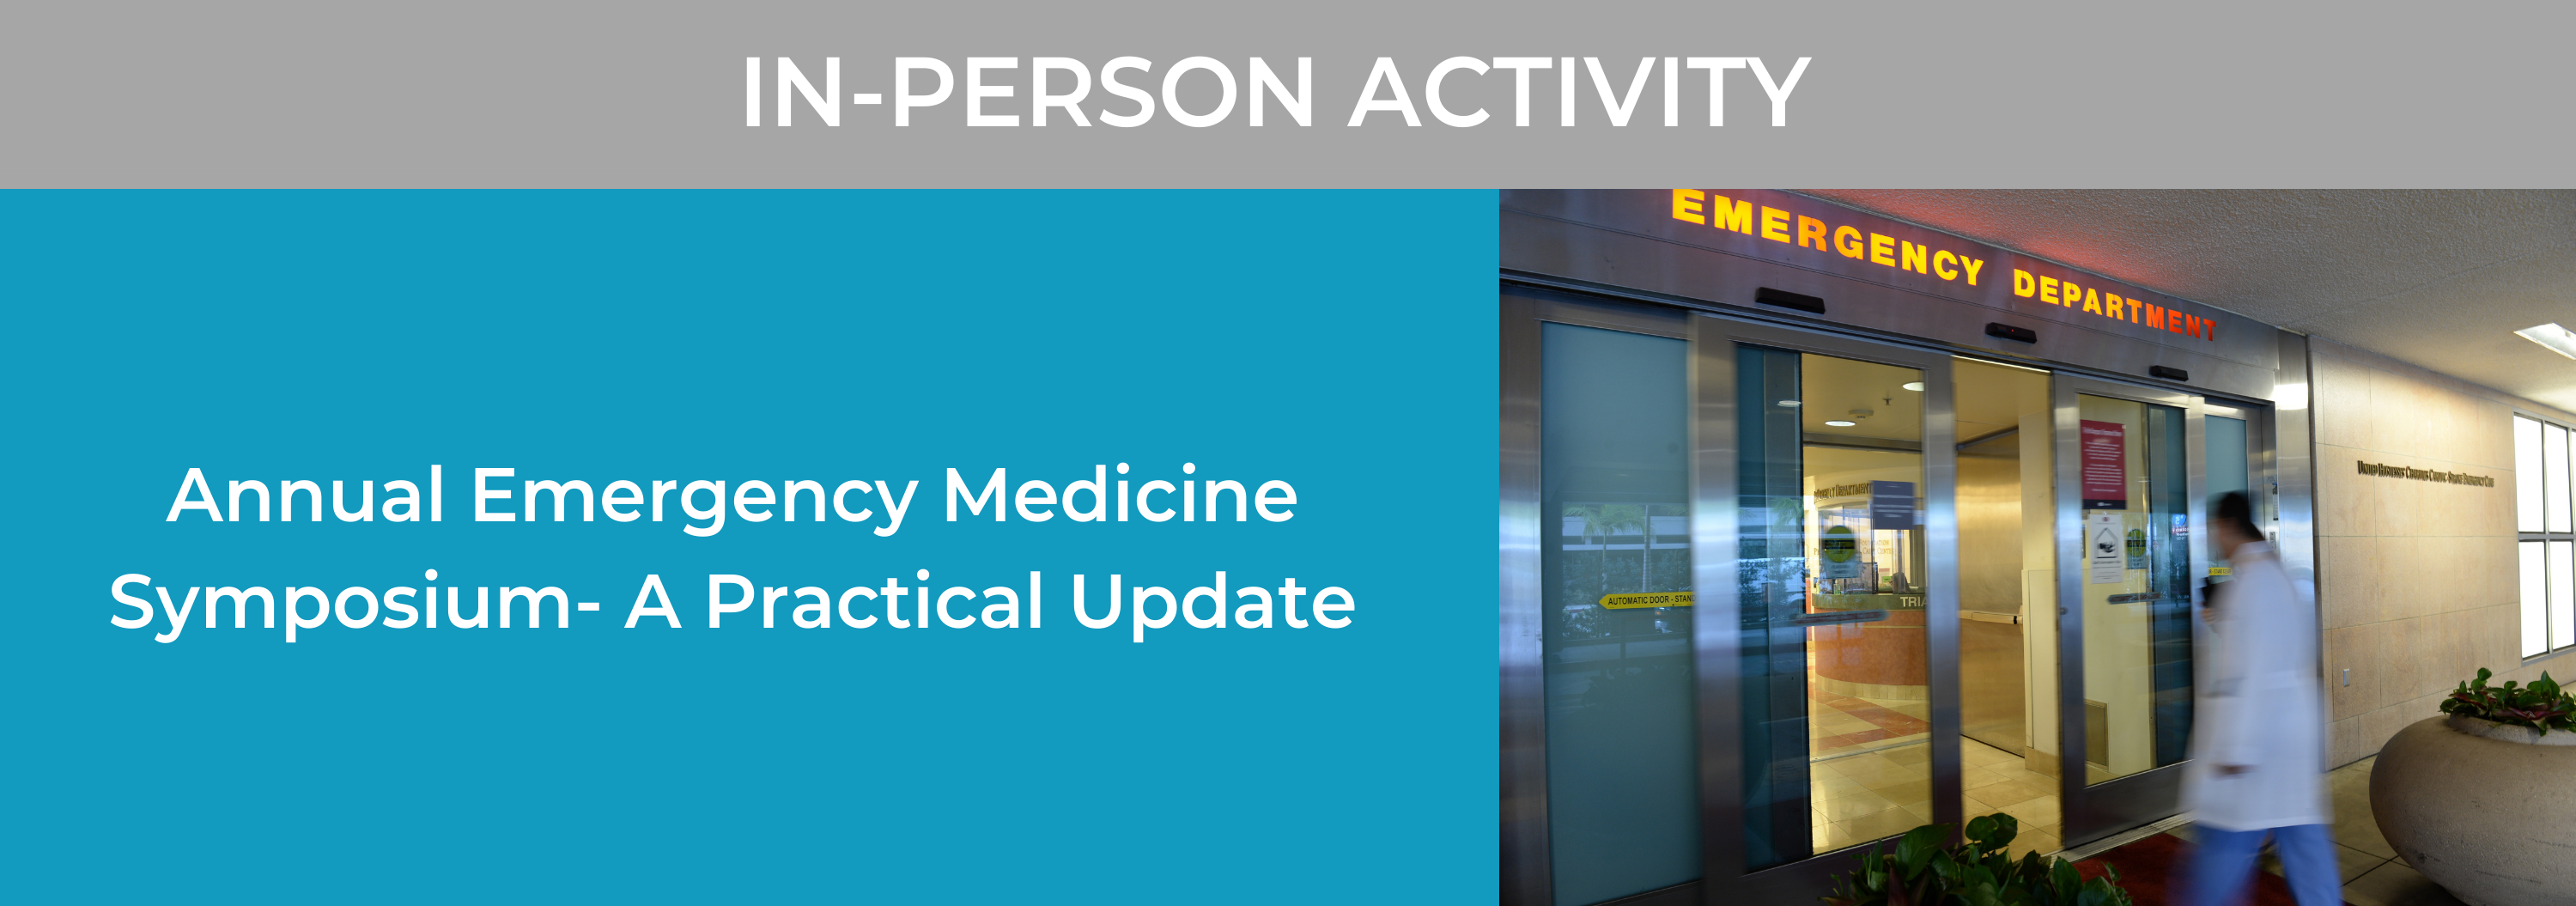 19th Annual Emergency Medicine Symposium - A Practical Update Banner